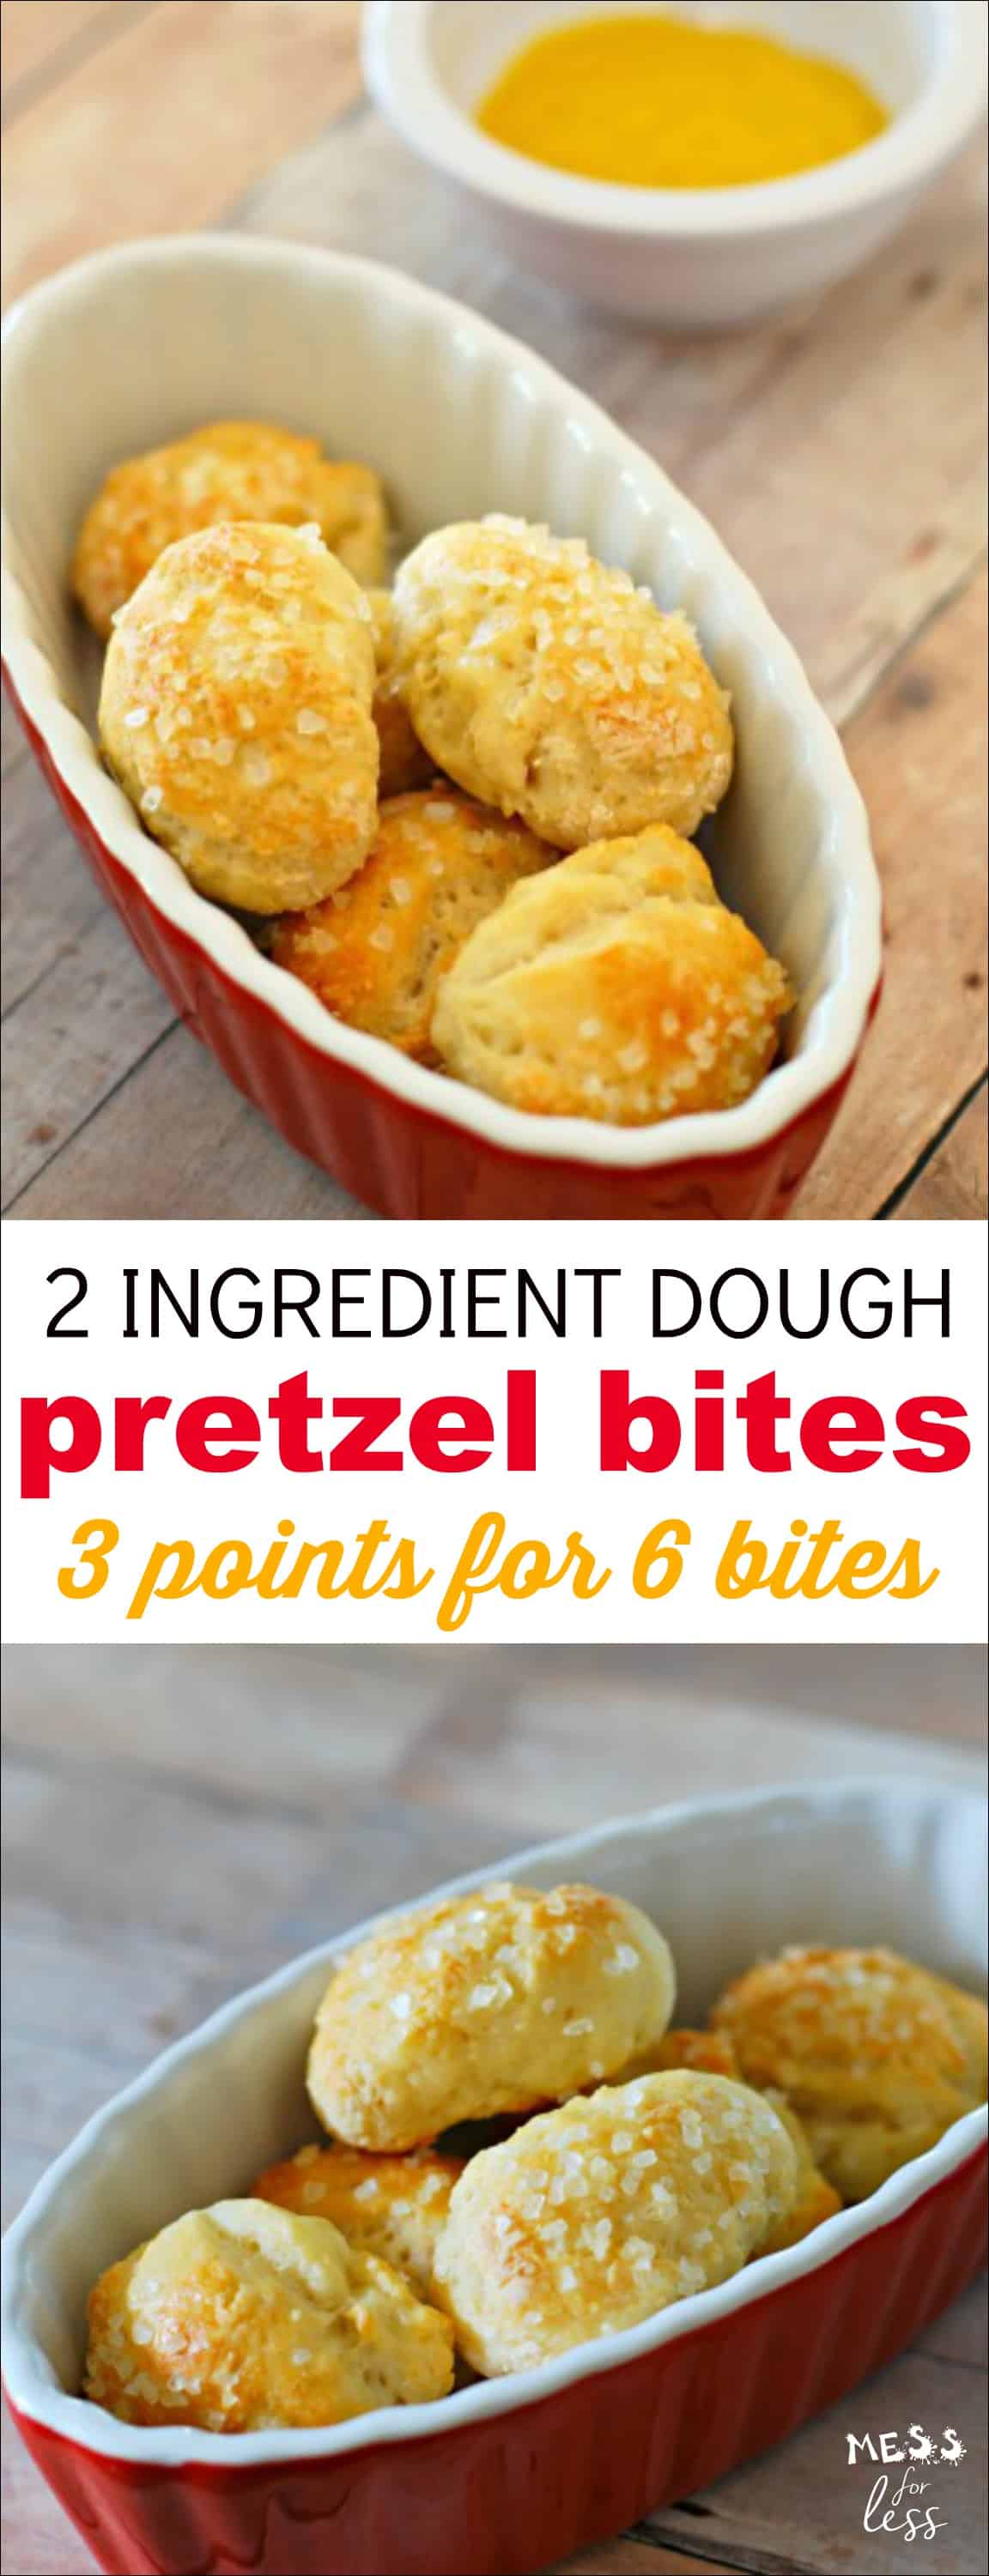 Weight Watchers friendly Two Ingredient Dough Pretzel Bites. Six pretzel bites are just 3 points on the Freestyle program so you can enjoy a yummy treat with no guilt. 